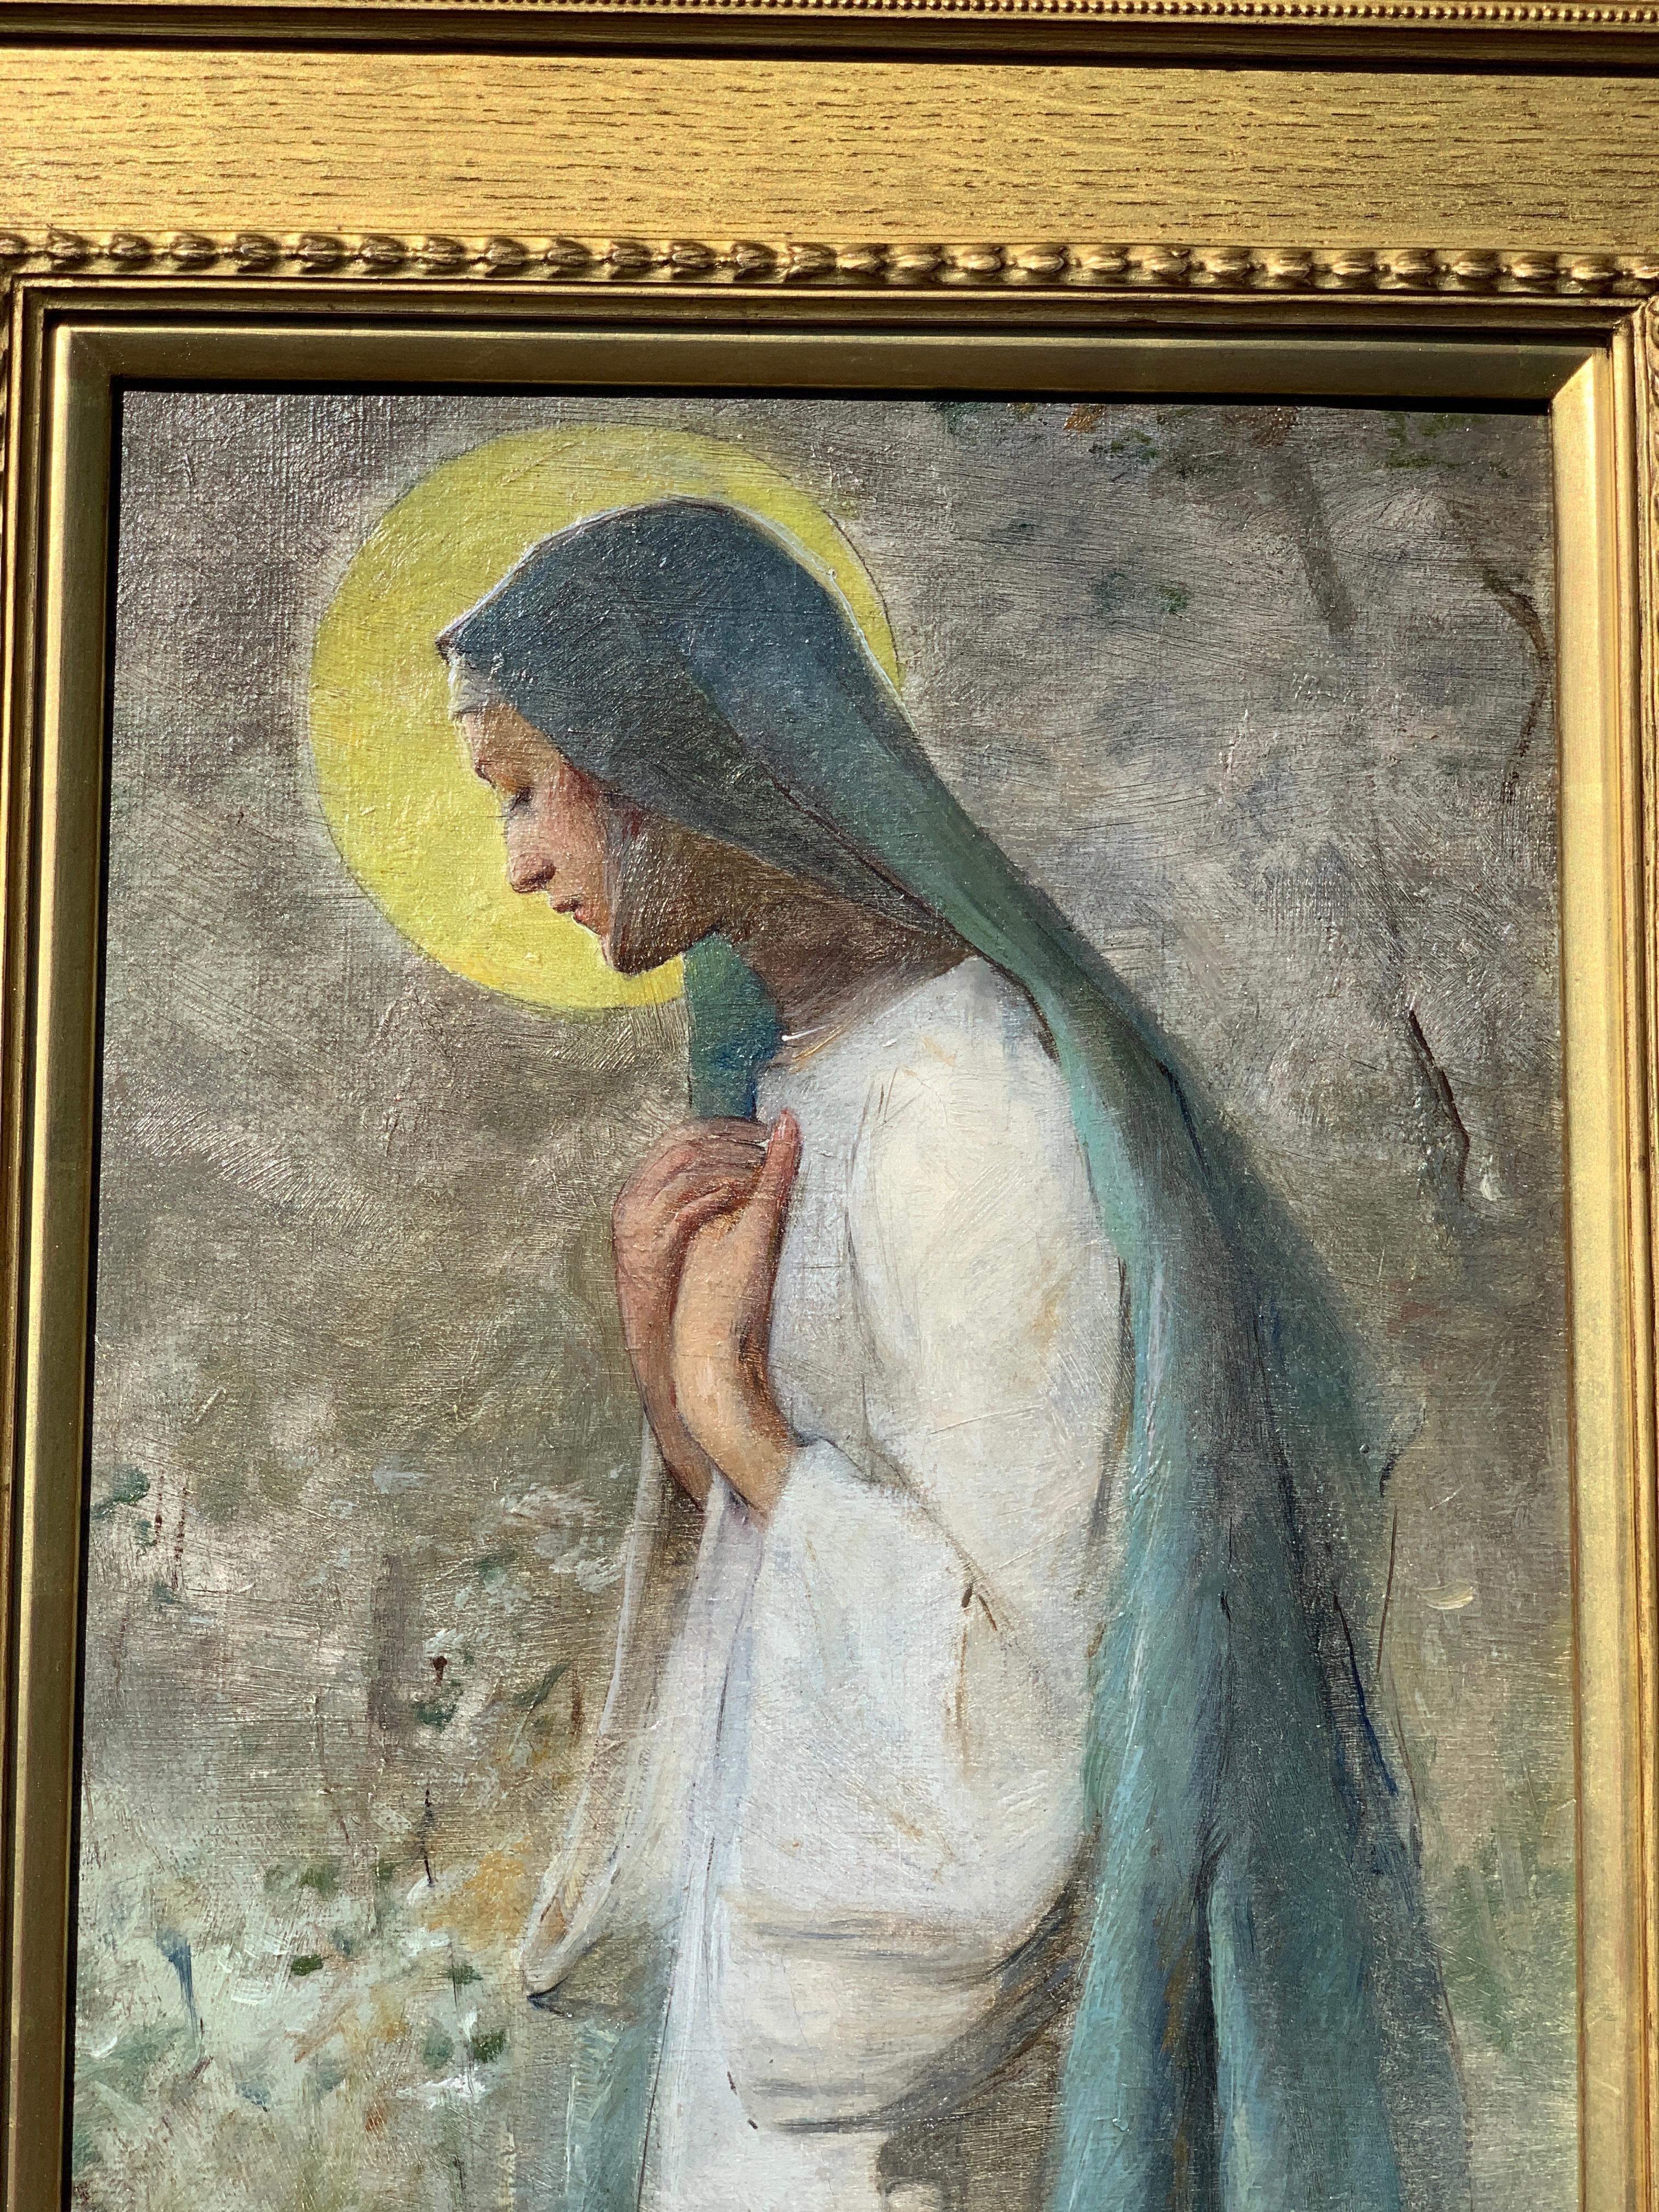 English Victorian Pre-Raphaelite portrait of a Madonna or Religious Nun figure  - Painting by Attributed to Thomas Cooper Gotch